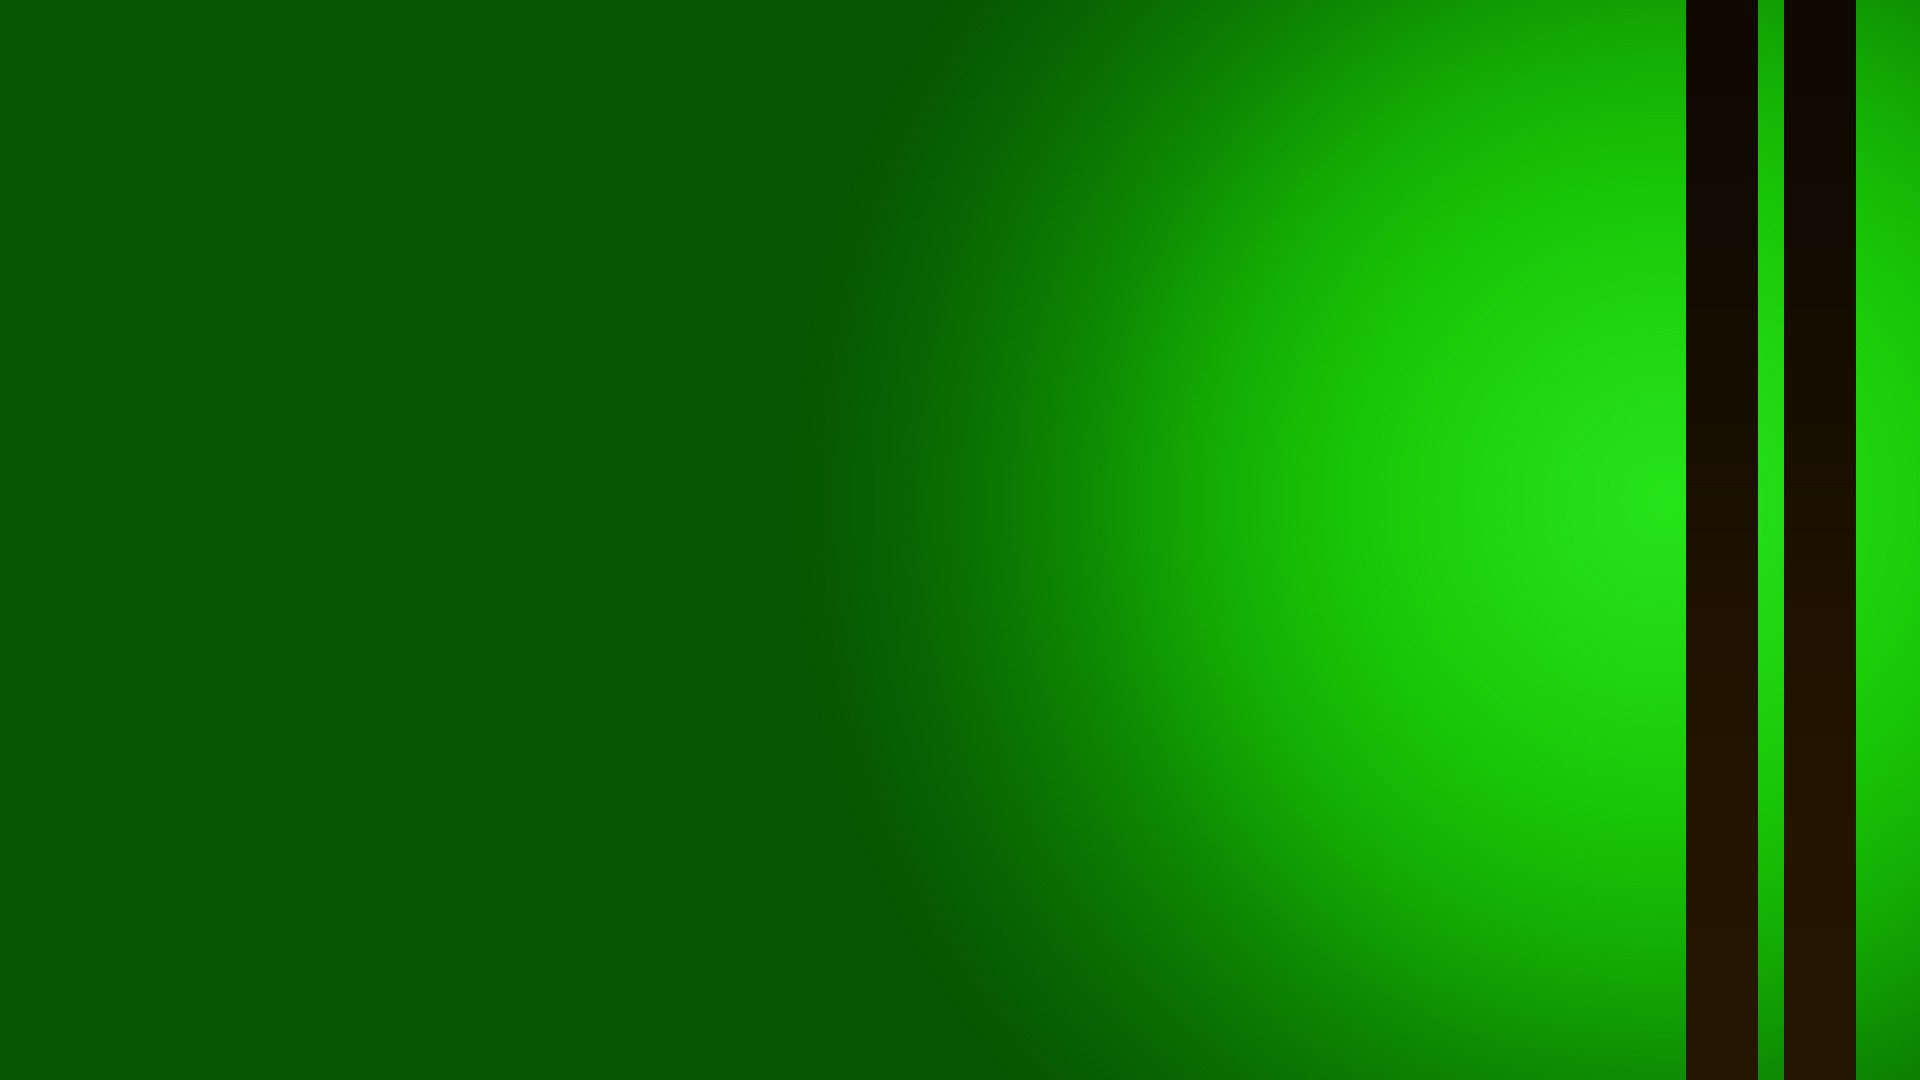 Black and Green Background Wallpaper HD with image resolution 1920x1080 pixel. You can make this wallpaper for your Desktop Computer Backgrounds, Mac Wallpapers, Android Lock screen or iPhone Screensavers